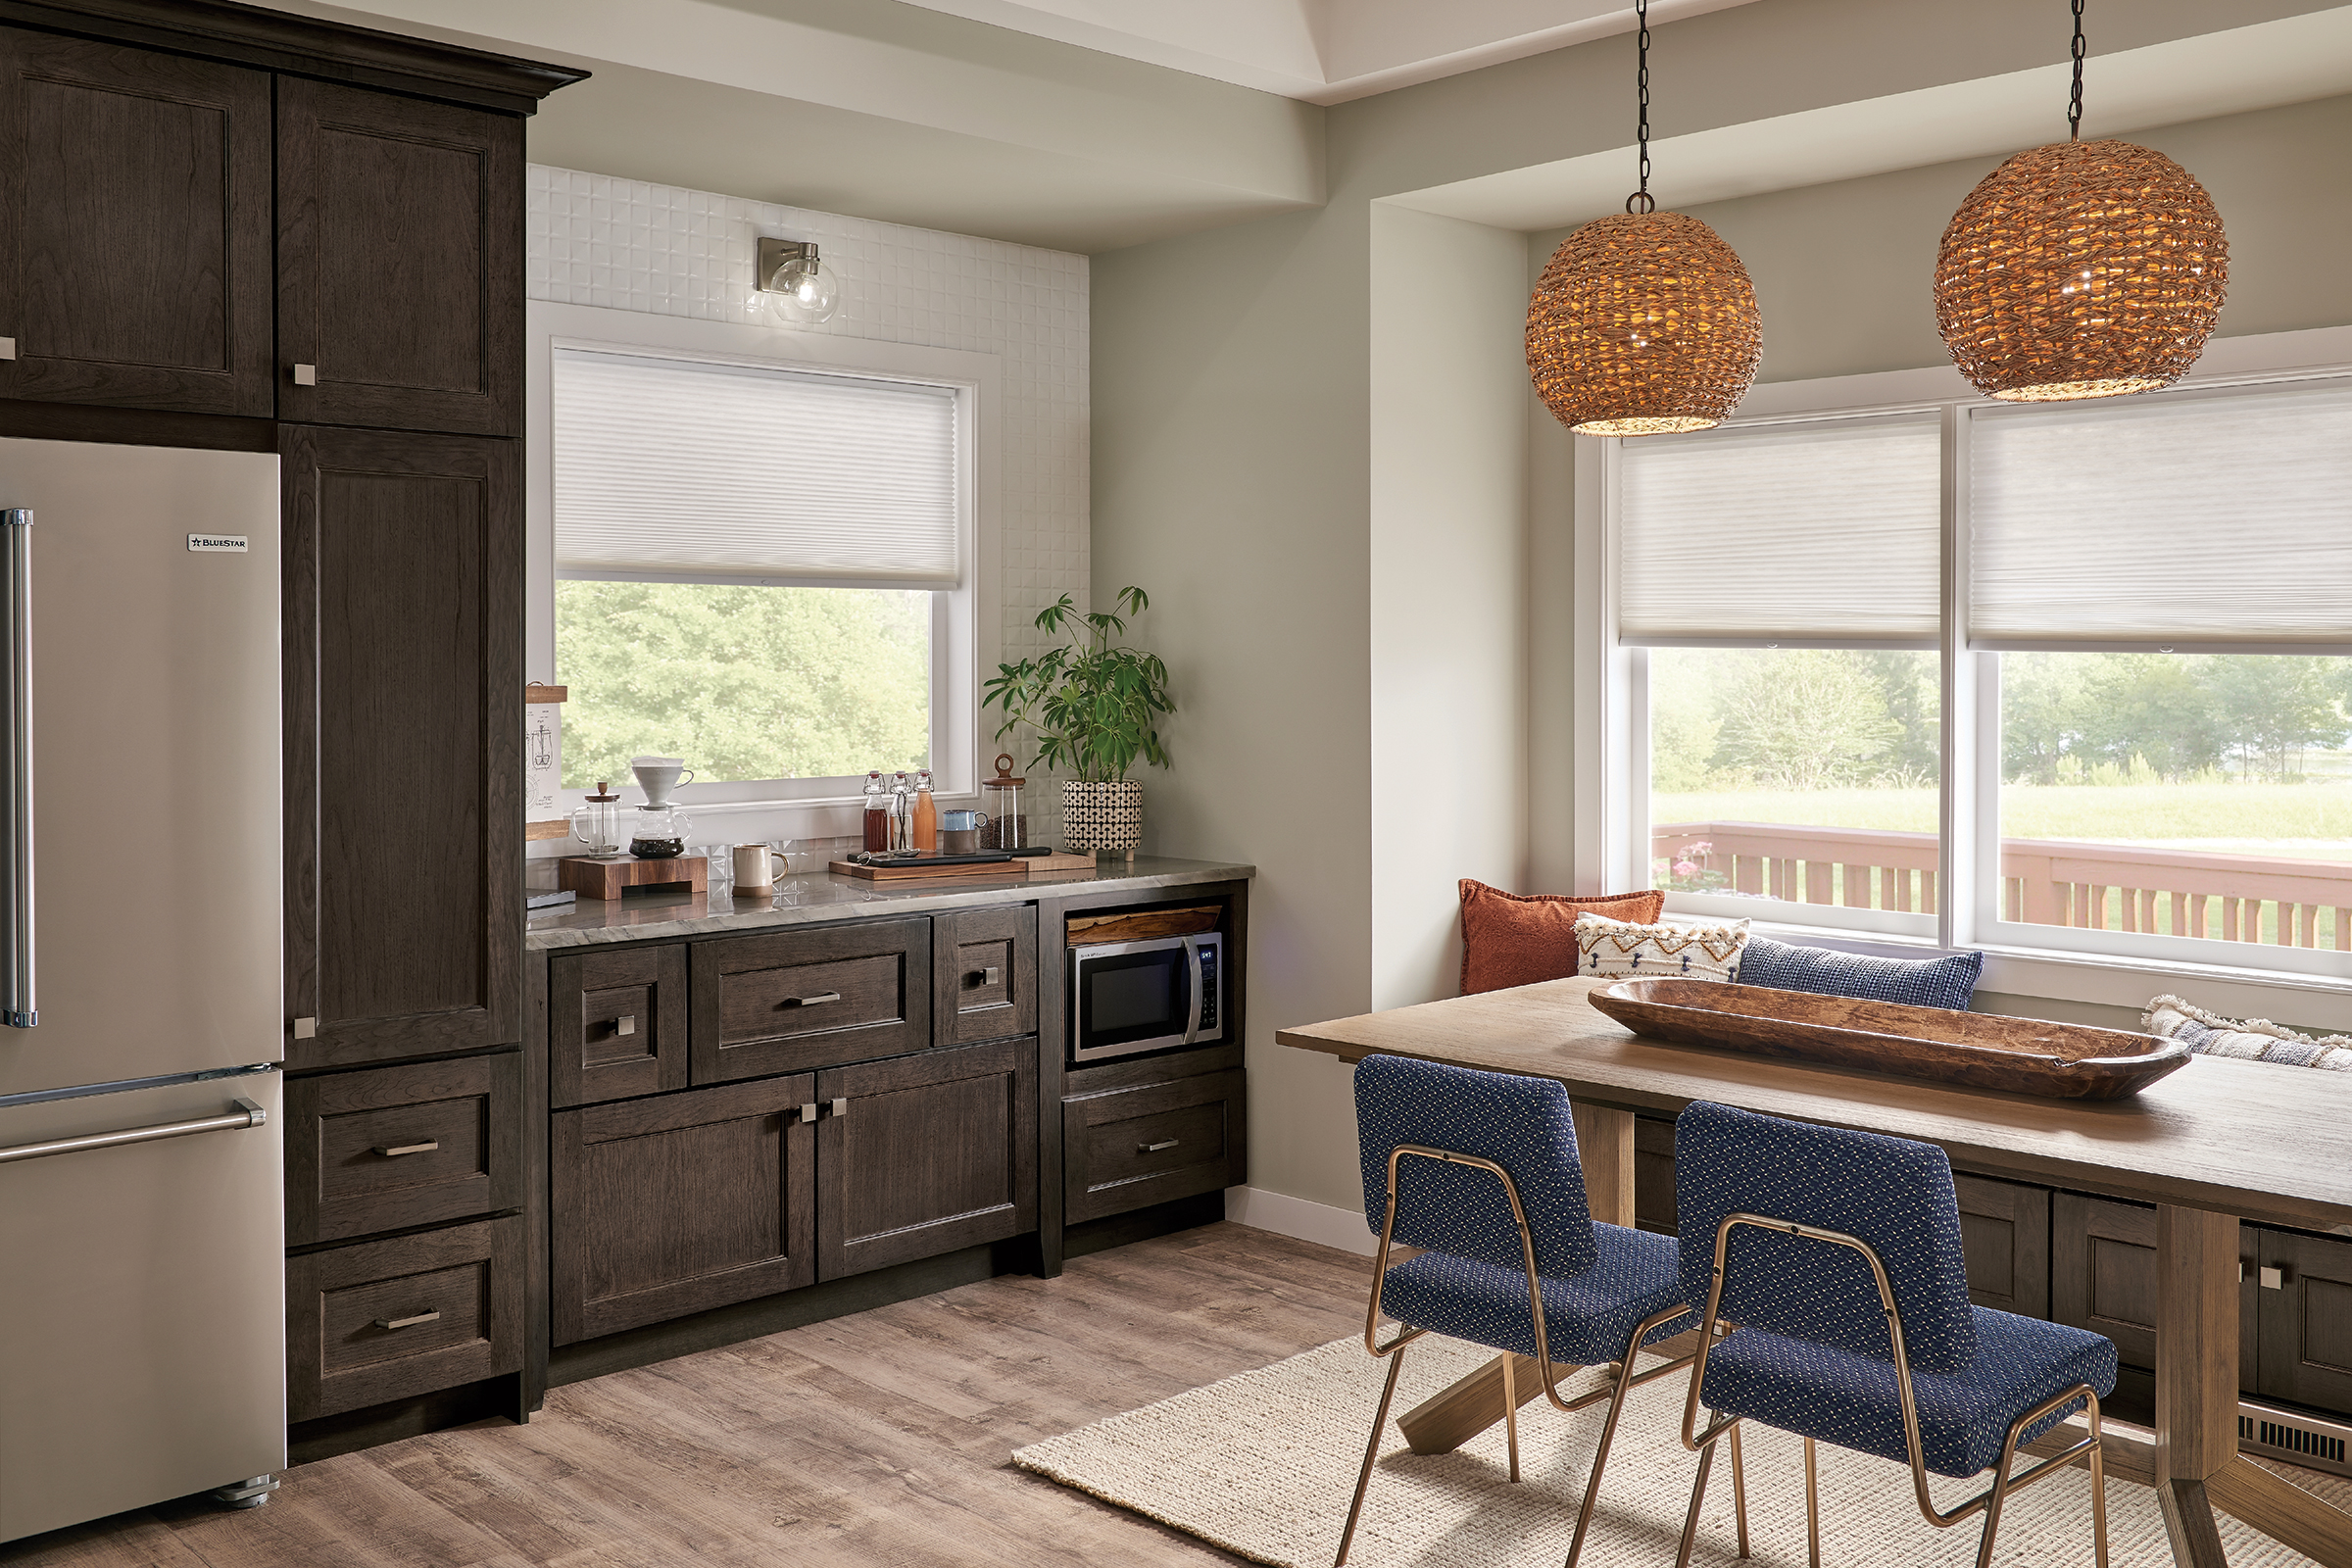 Transitional kitchen design featuring KraftMaid Cherry cabinets in Weathered Ash Brown finish